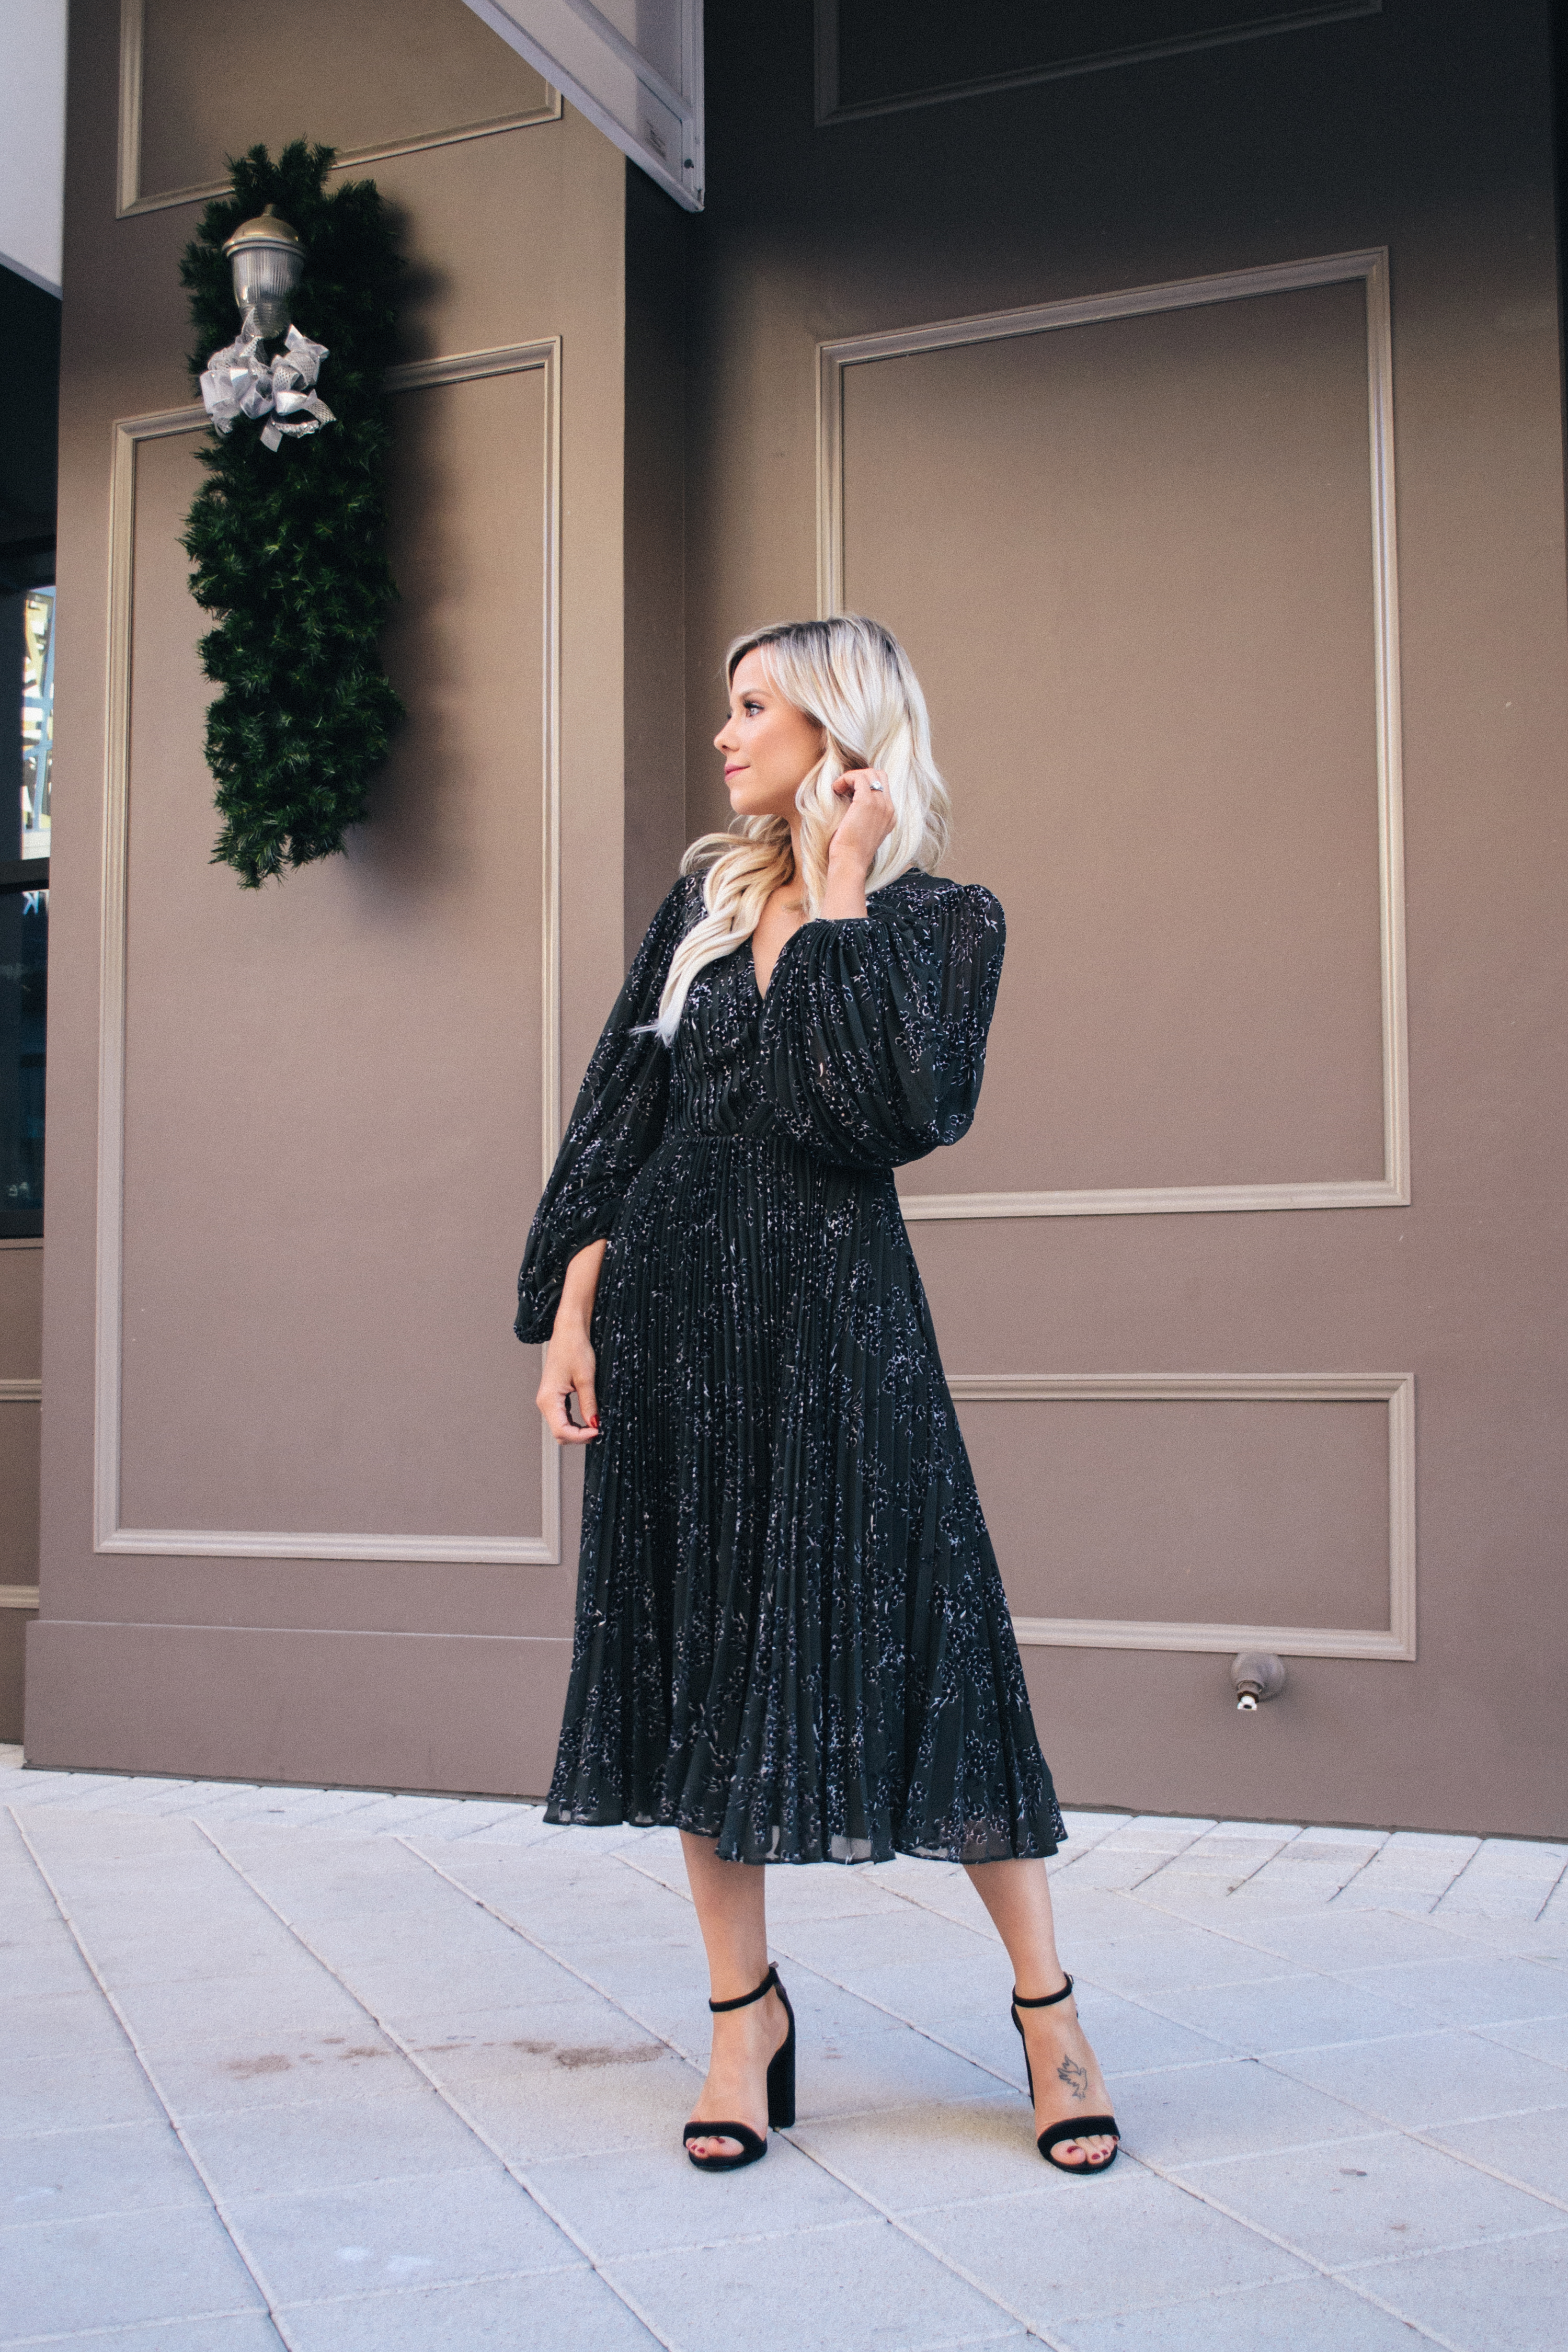 Holiday dressing, Holiday party dress, Thanksgiving Dress, Christmas dress, what to wear during the Holidays #holidaydress